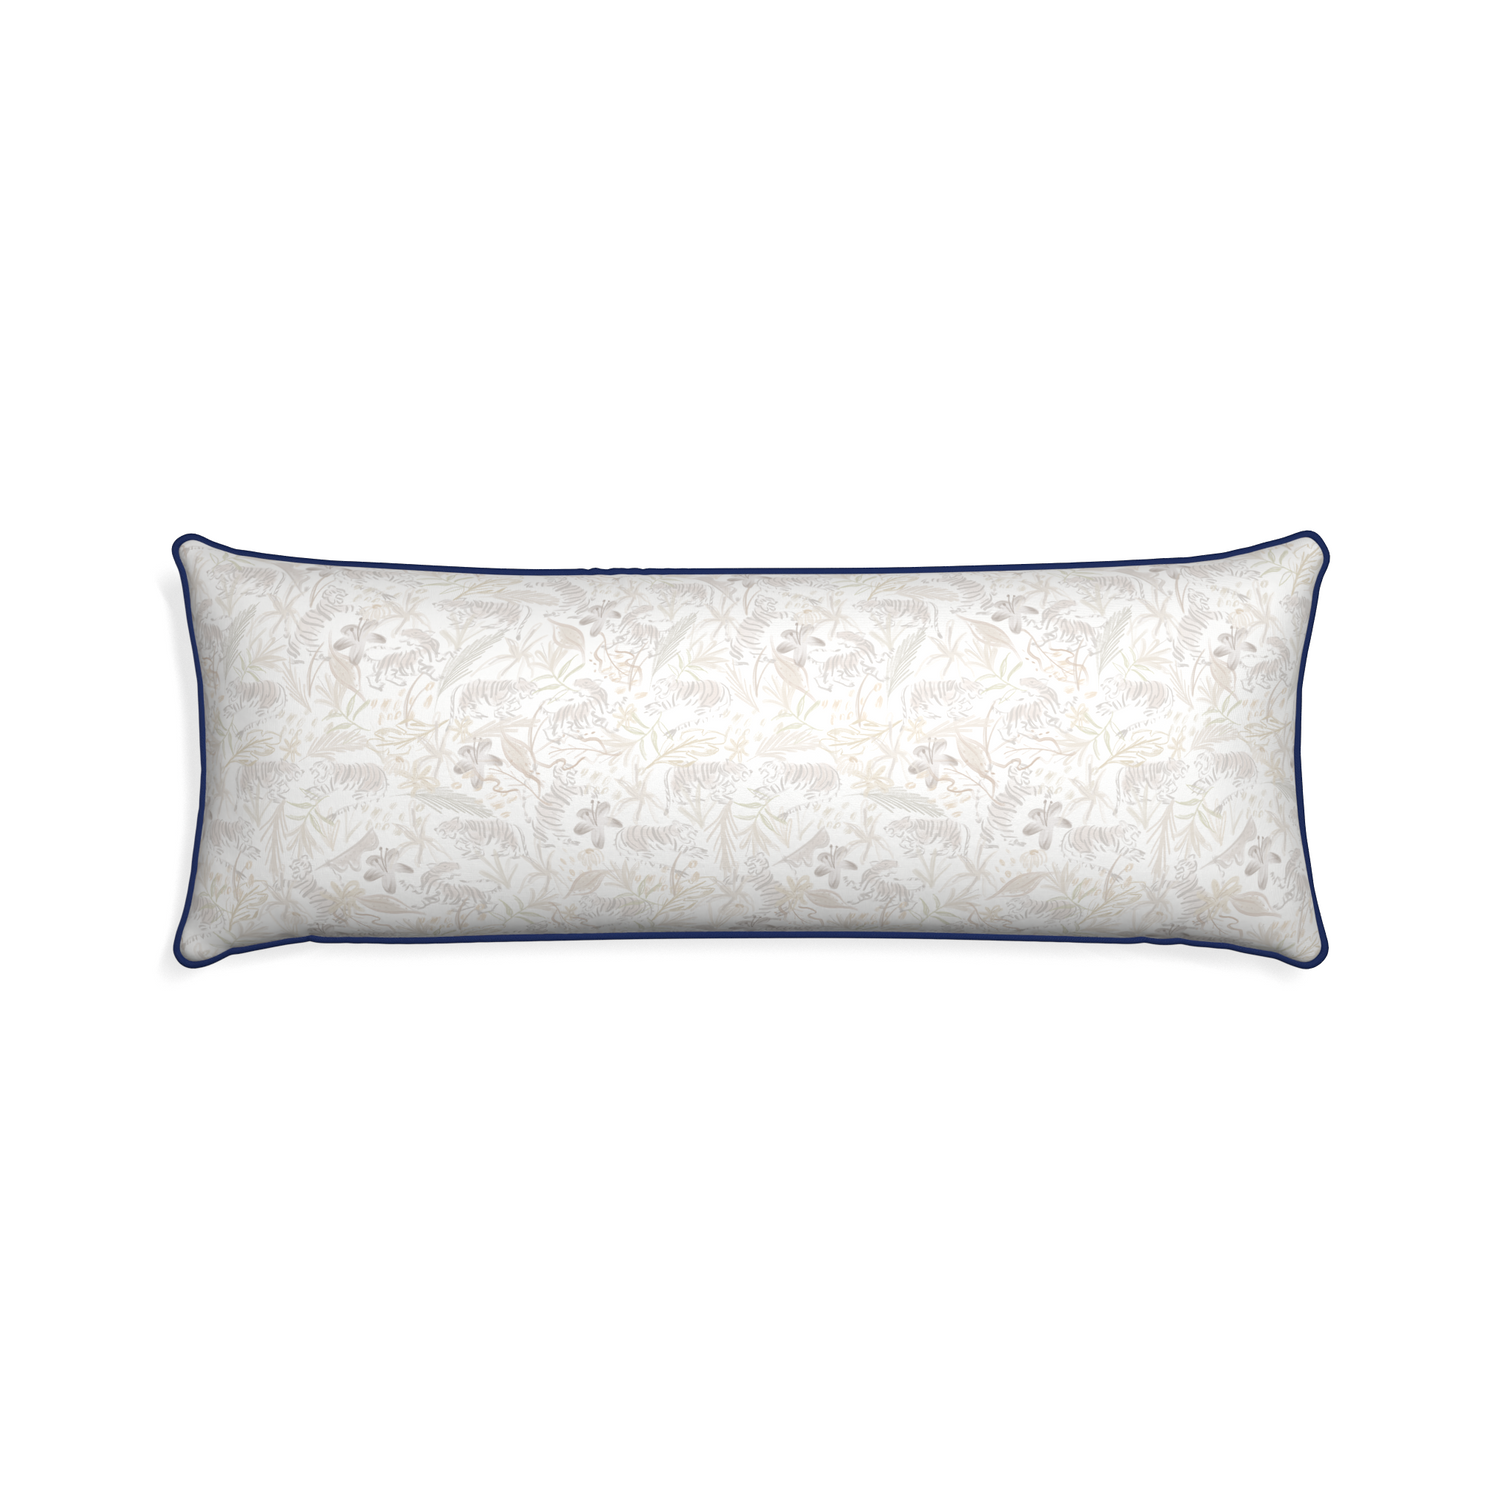 Xl-lumbar frida sand custom beige chinoiserie tigerpillow with midnight piping on white background